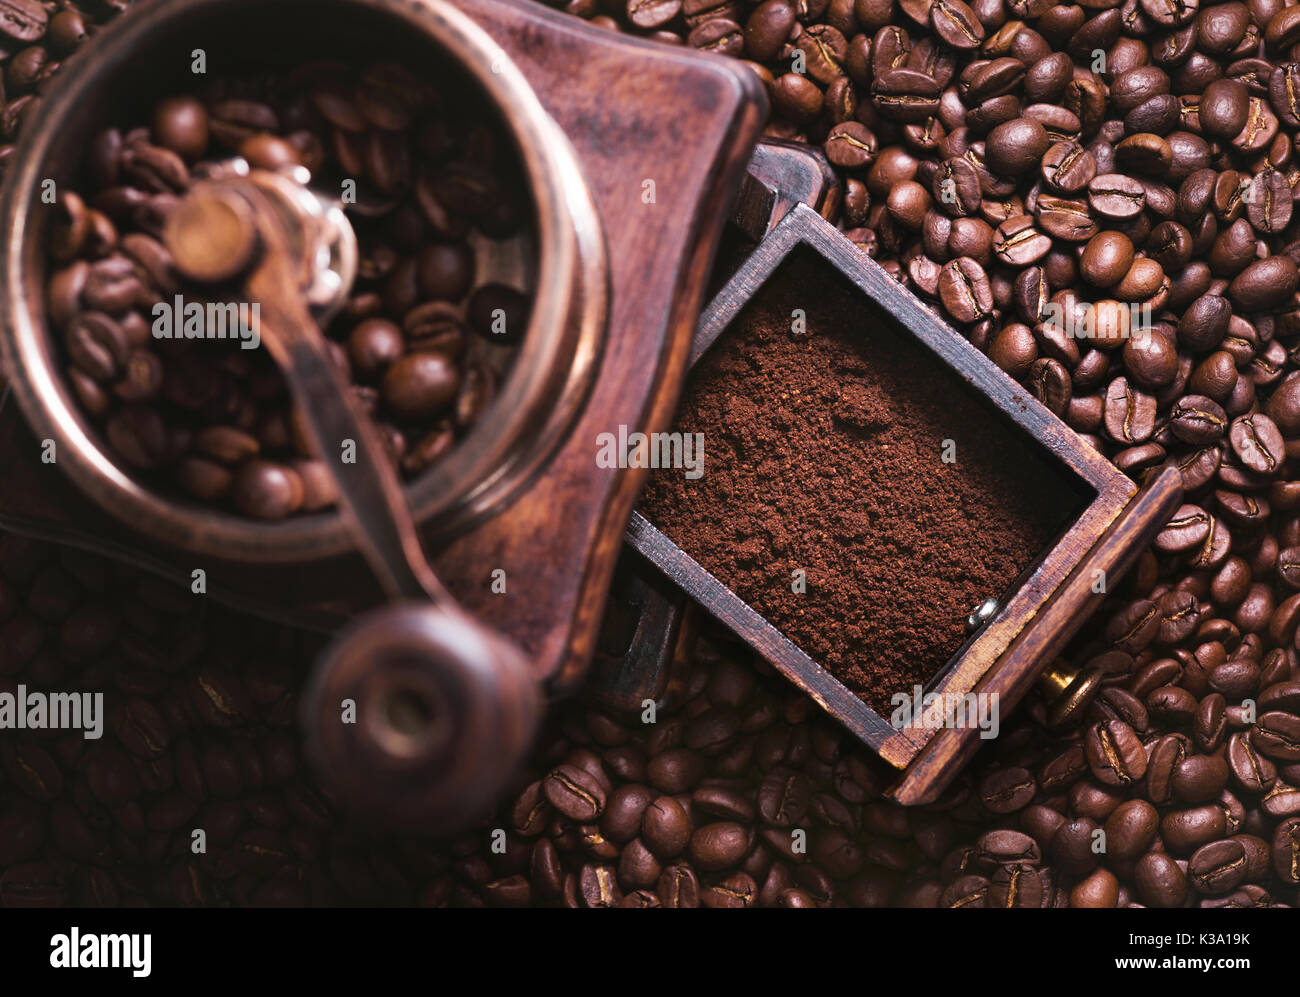 Grinding coffee from fresh roasted coffee beans. Stock Photo